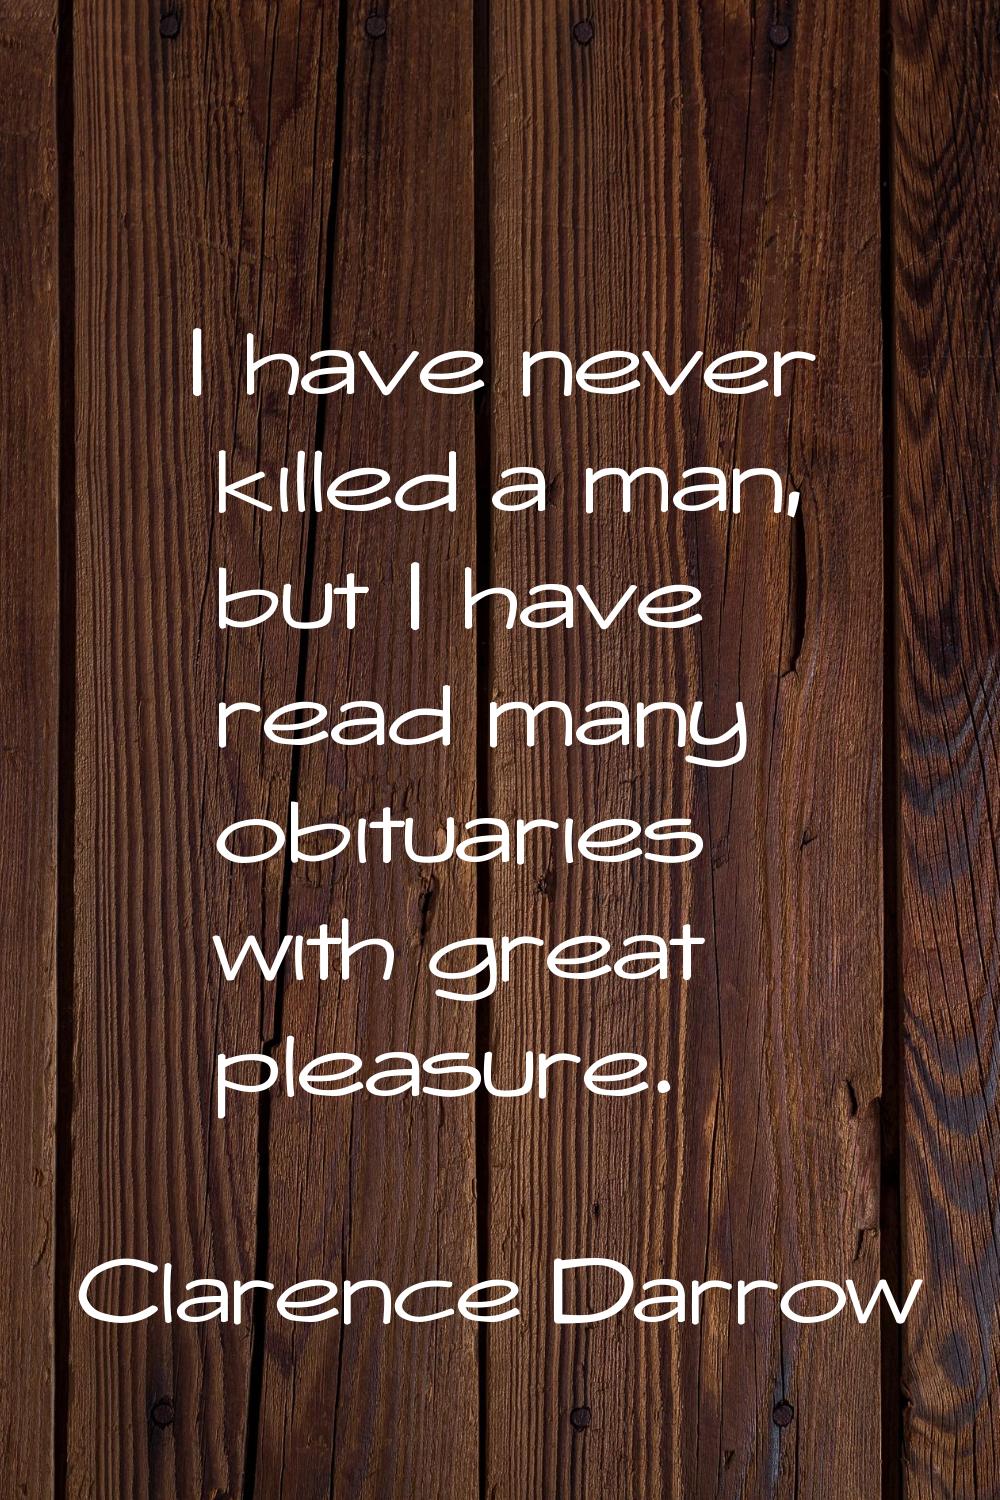 I have never killed a man, but I have read many obituaries with great pleasure.